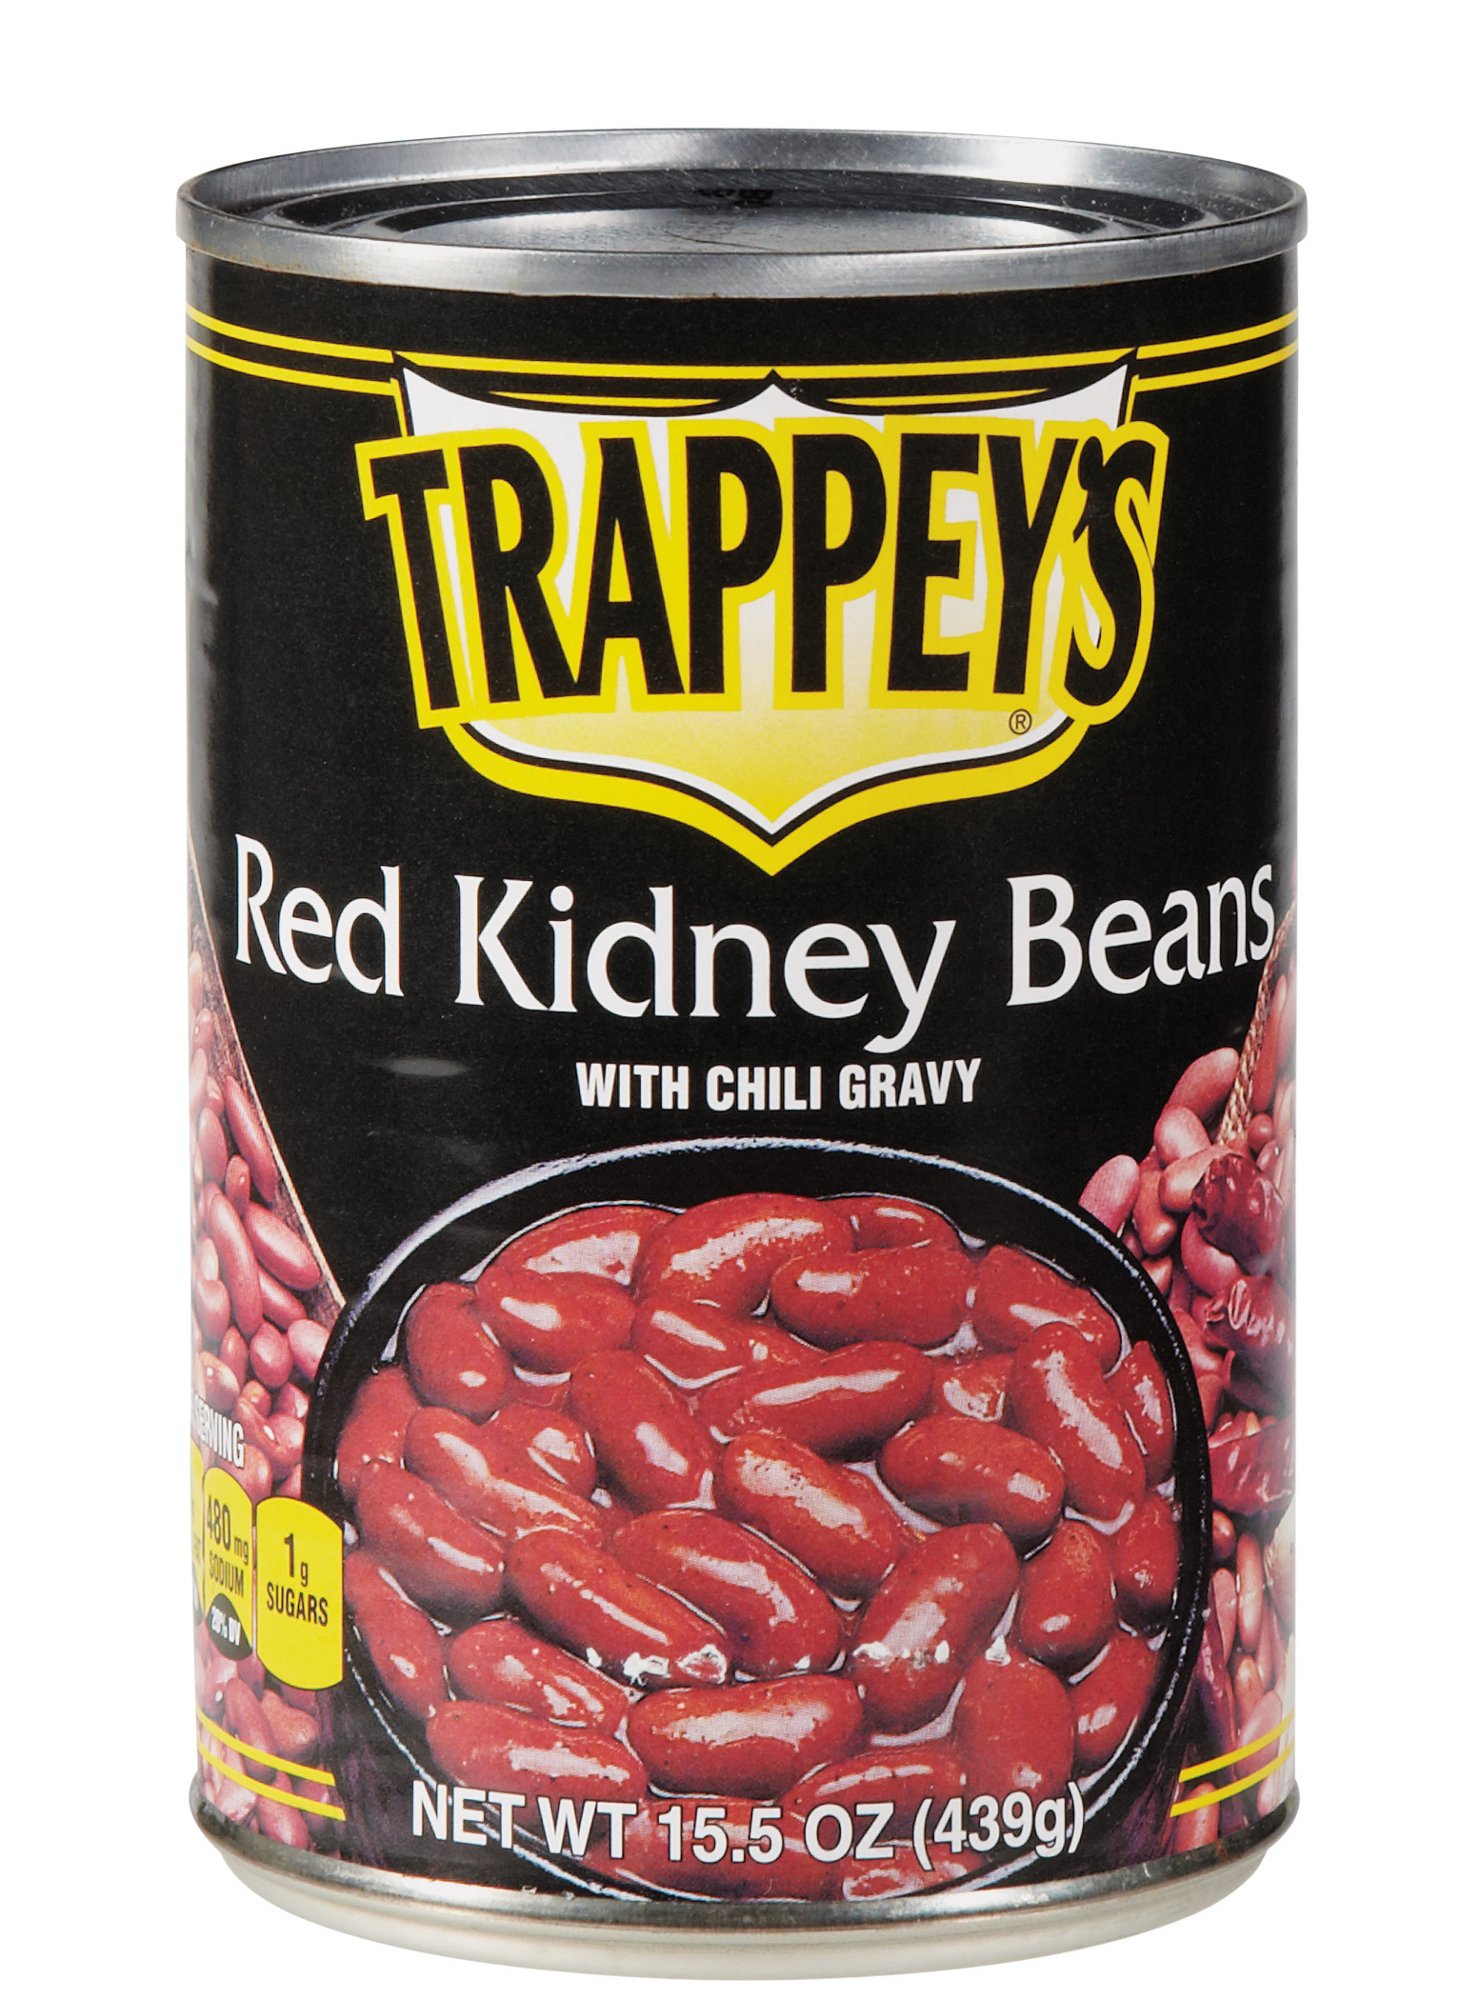 Trappey's Red Kidney Beans With Chili Gravy - Shop Canned Beans at HEB